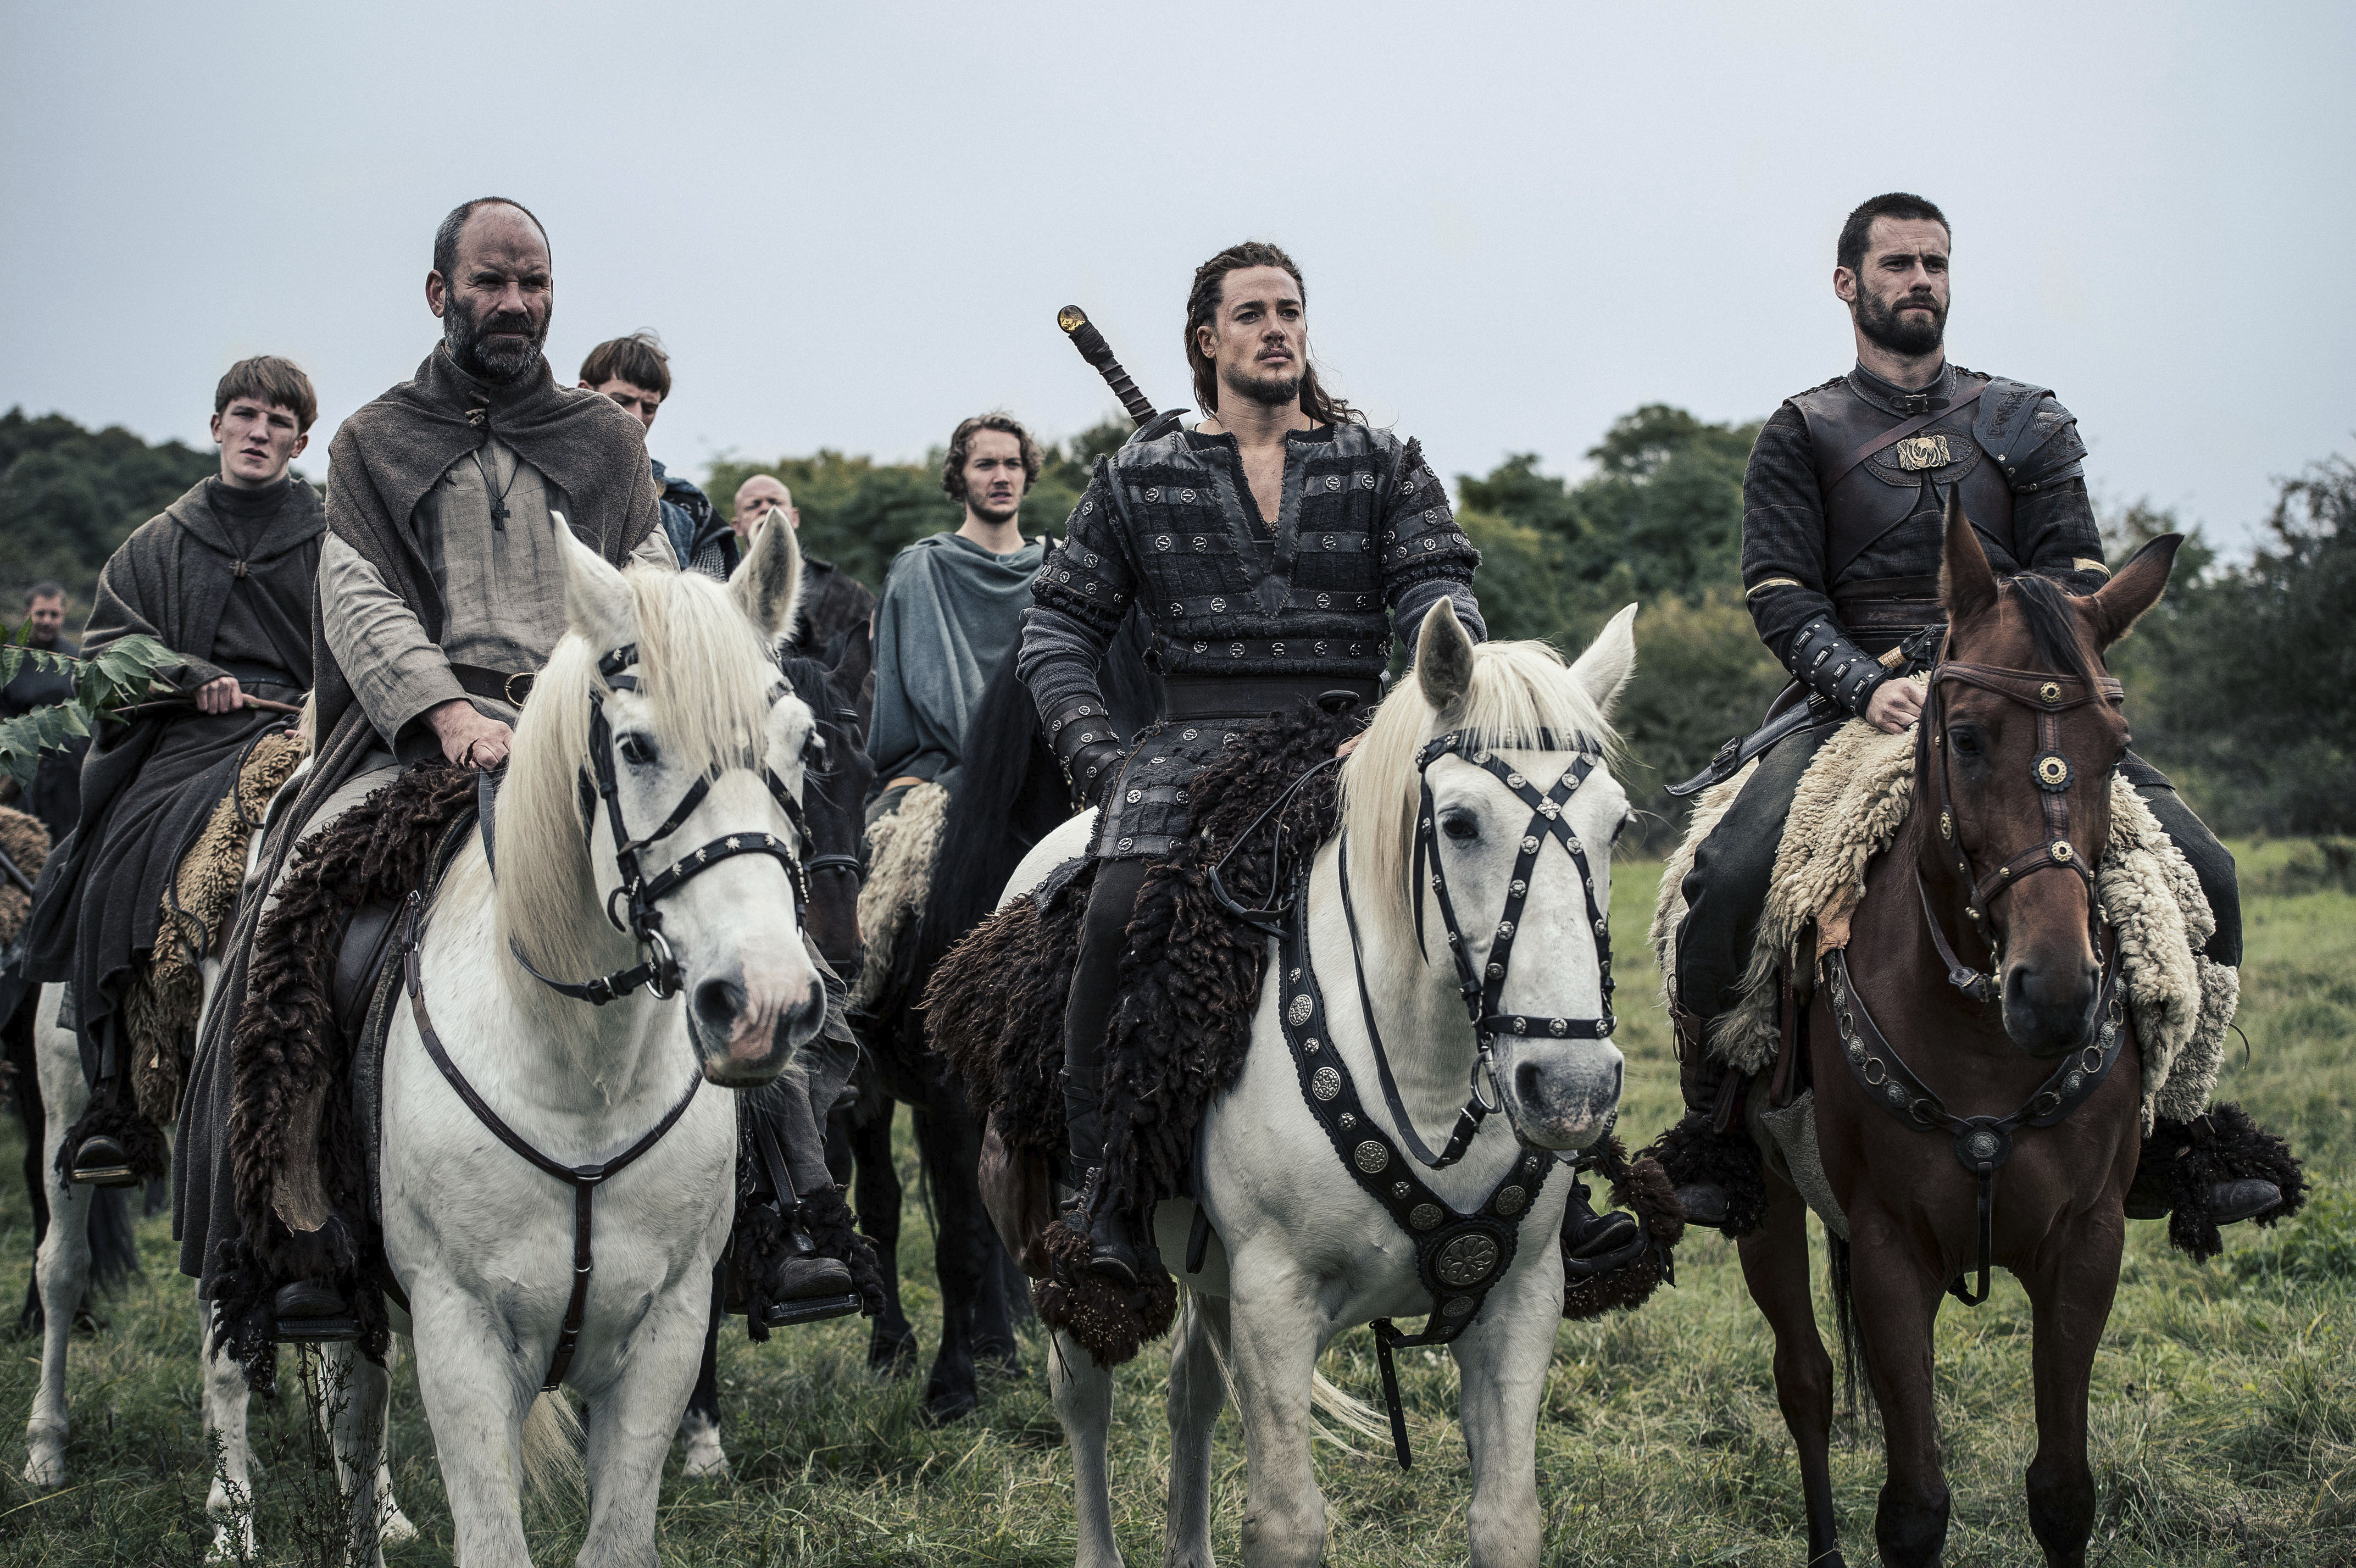 Toby as Aethelred in 'The Last Kingdom' - 2x07 - Promotional Stills